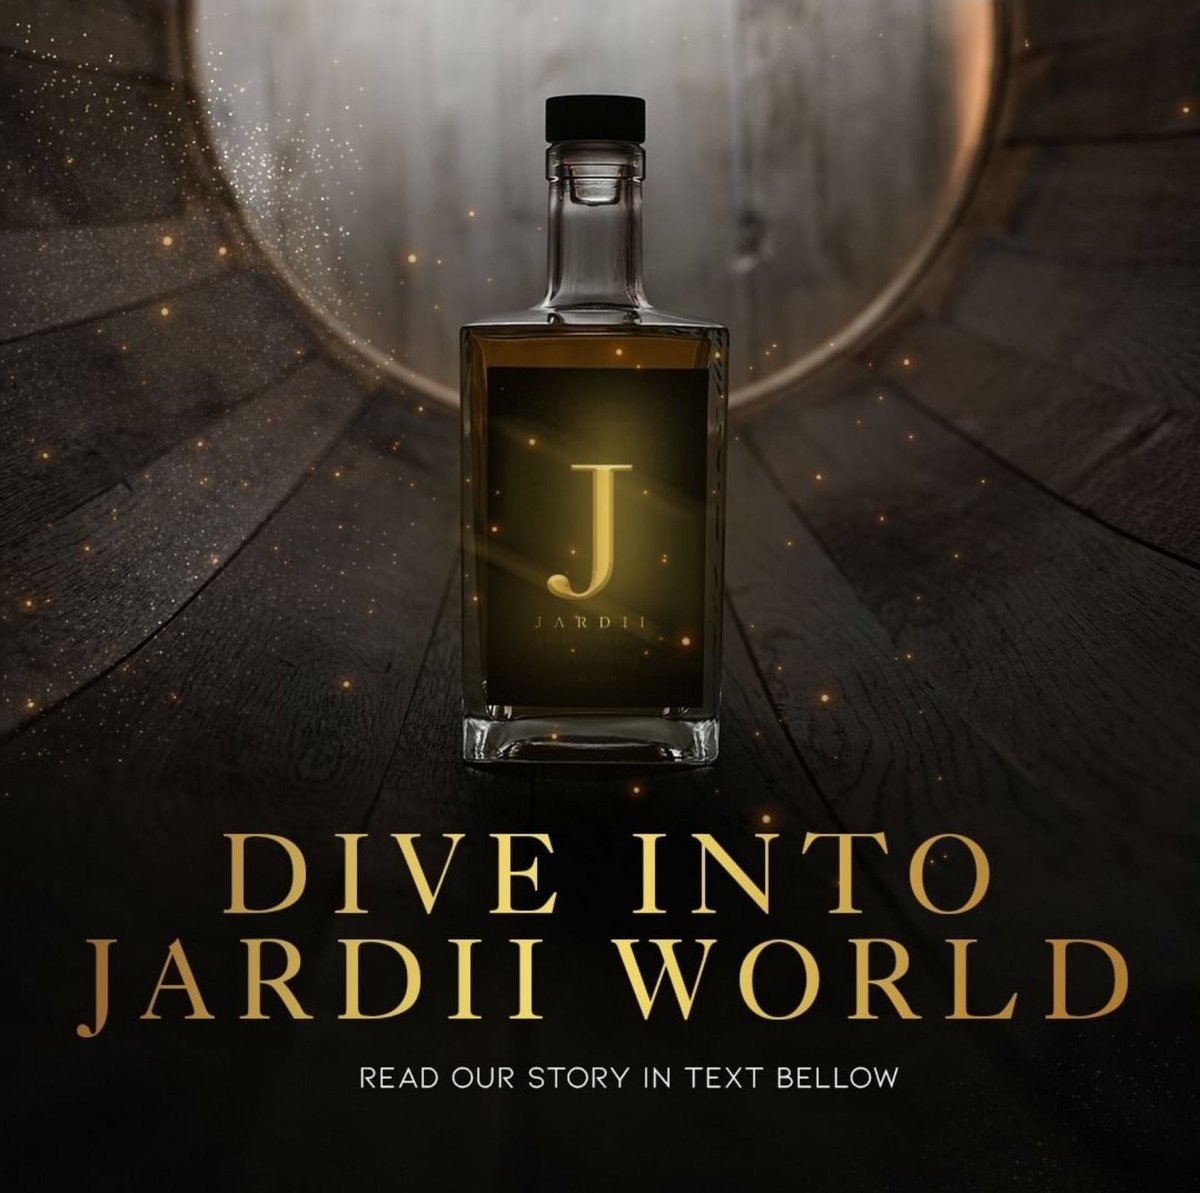 Experience luxury and exclusivity with Jardii Eau de Vie. Dive into the Jardii world and savor the rich, smooth flavors aged to perfection in oak barrels. #JardiiEauDeVie #OakBarrels #LuxurySpirits